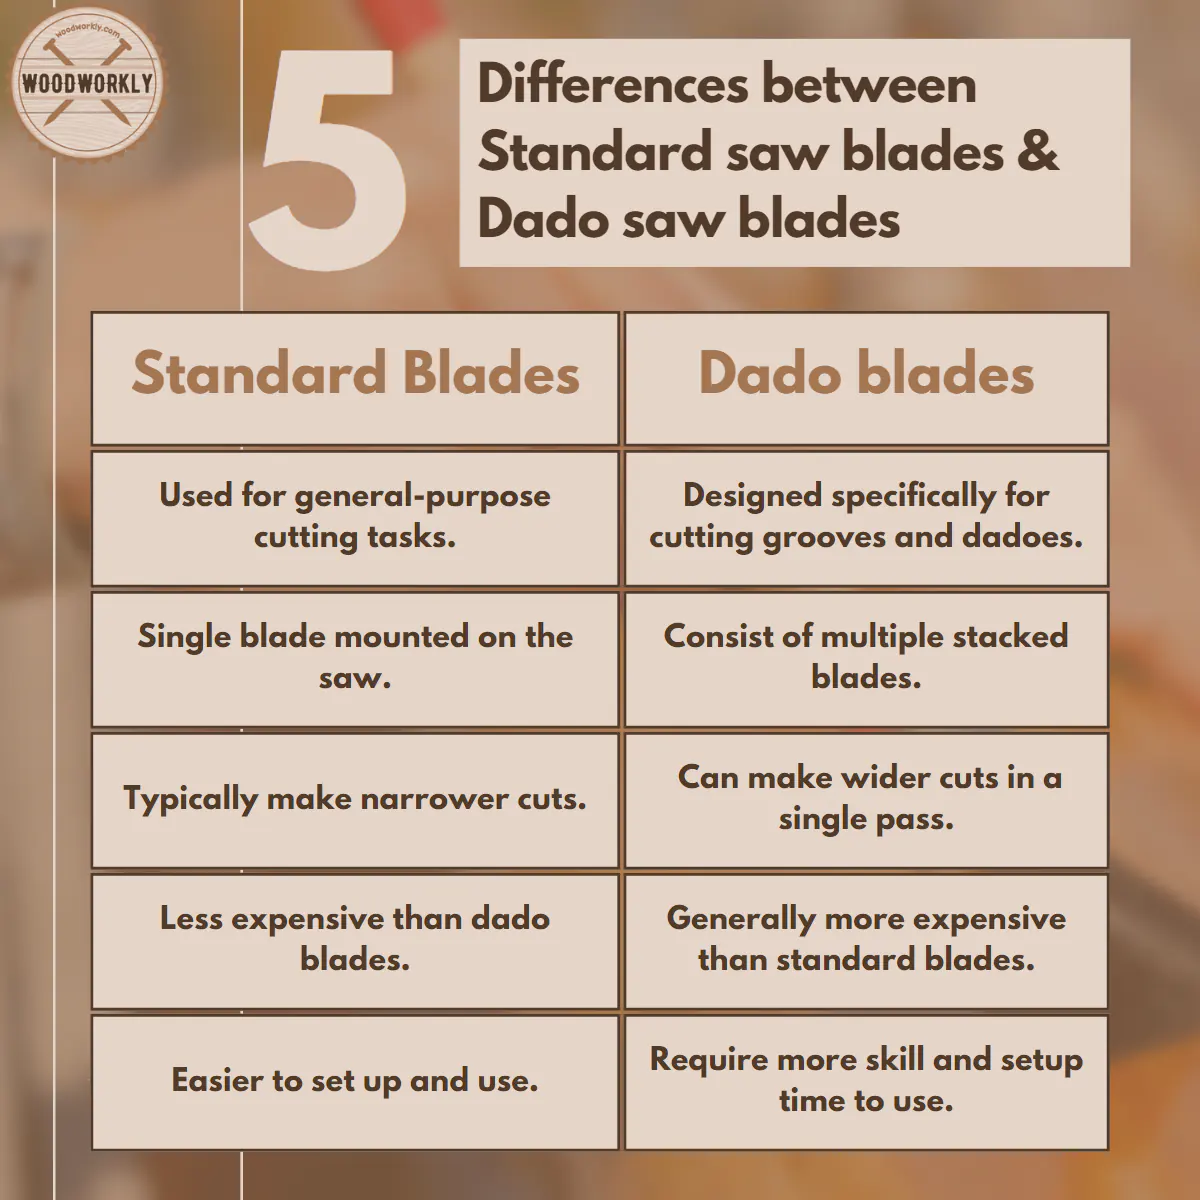 Differences between the Standard blades and Dado blades